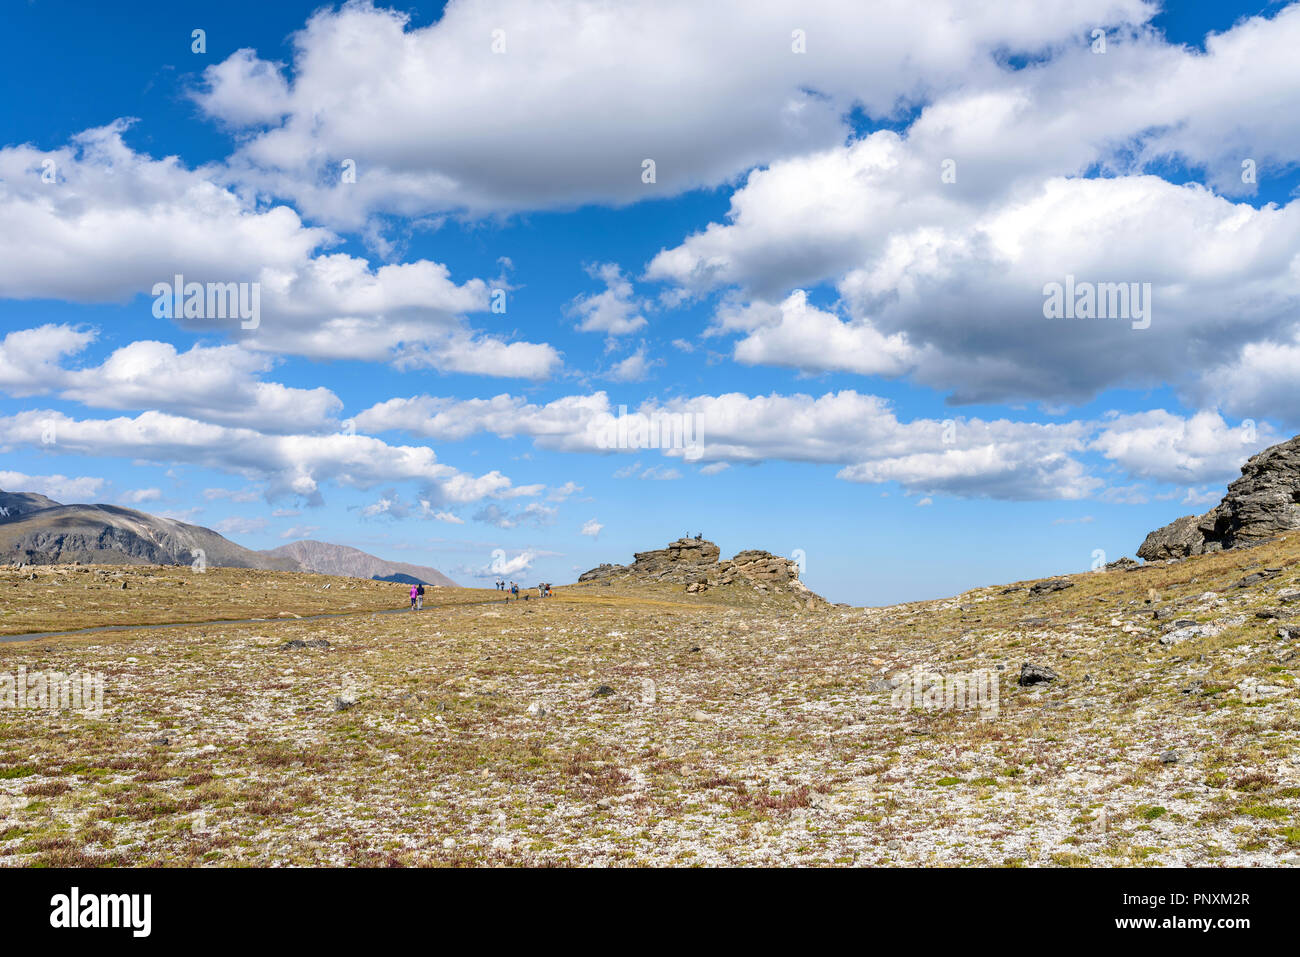 Walking on Tundra - Summer view of tourists walking on a trail crossing alpine tundra near Trail Ridge Road at top of Rocky Mountain National Park, CO Stock Photo